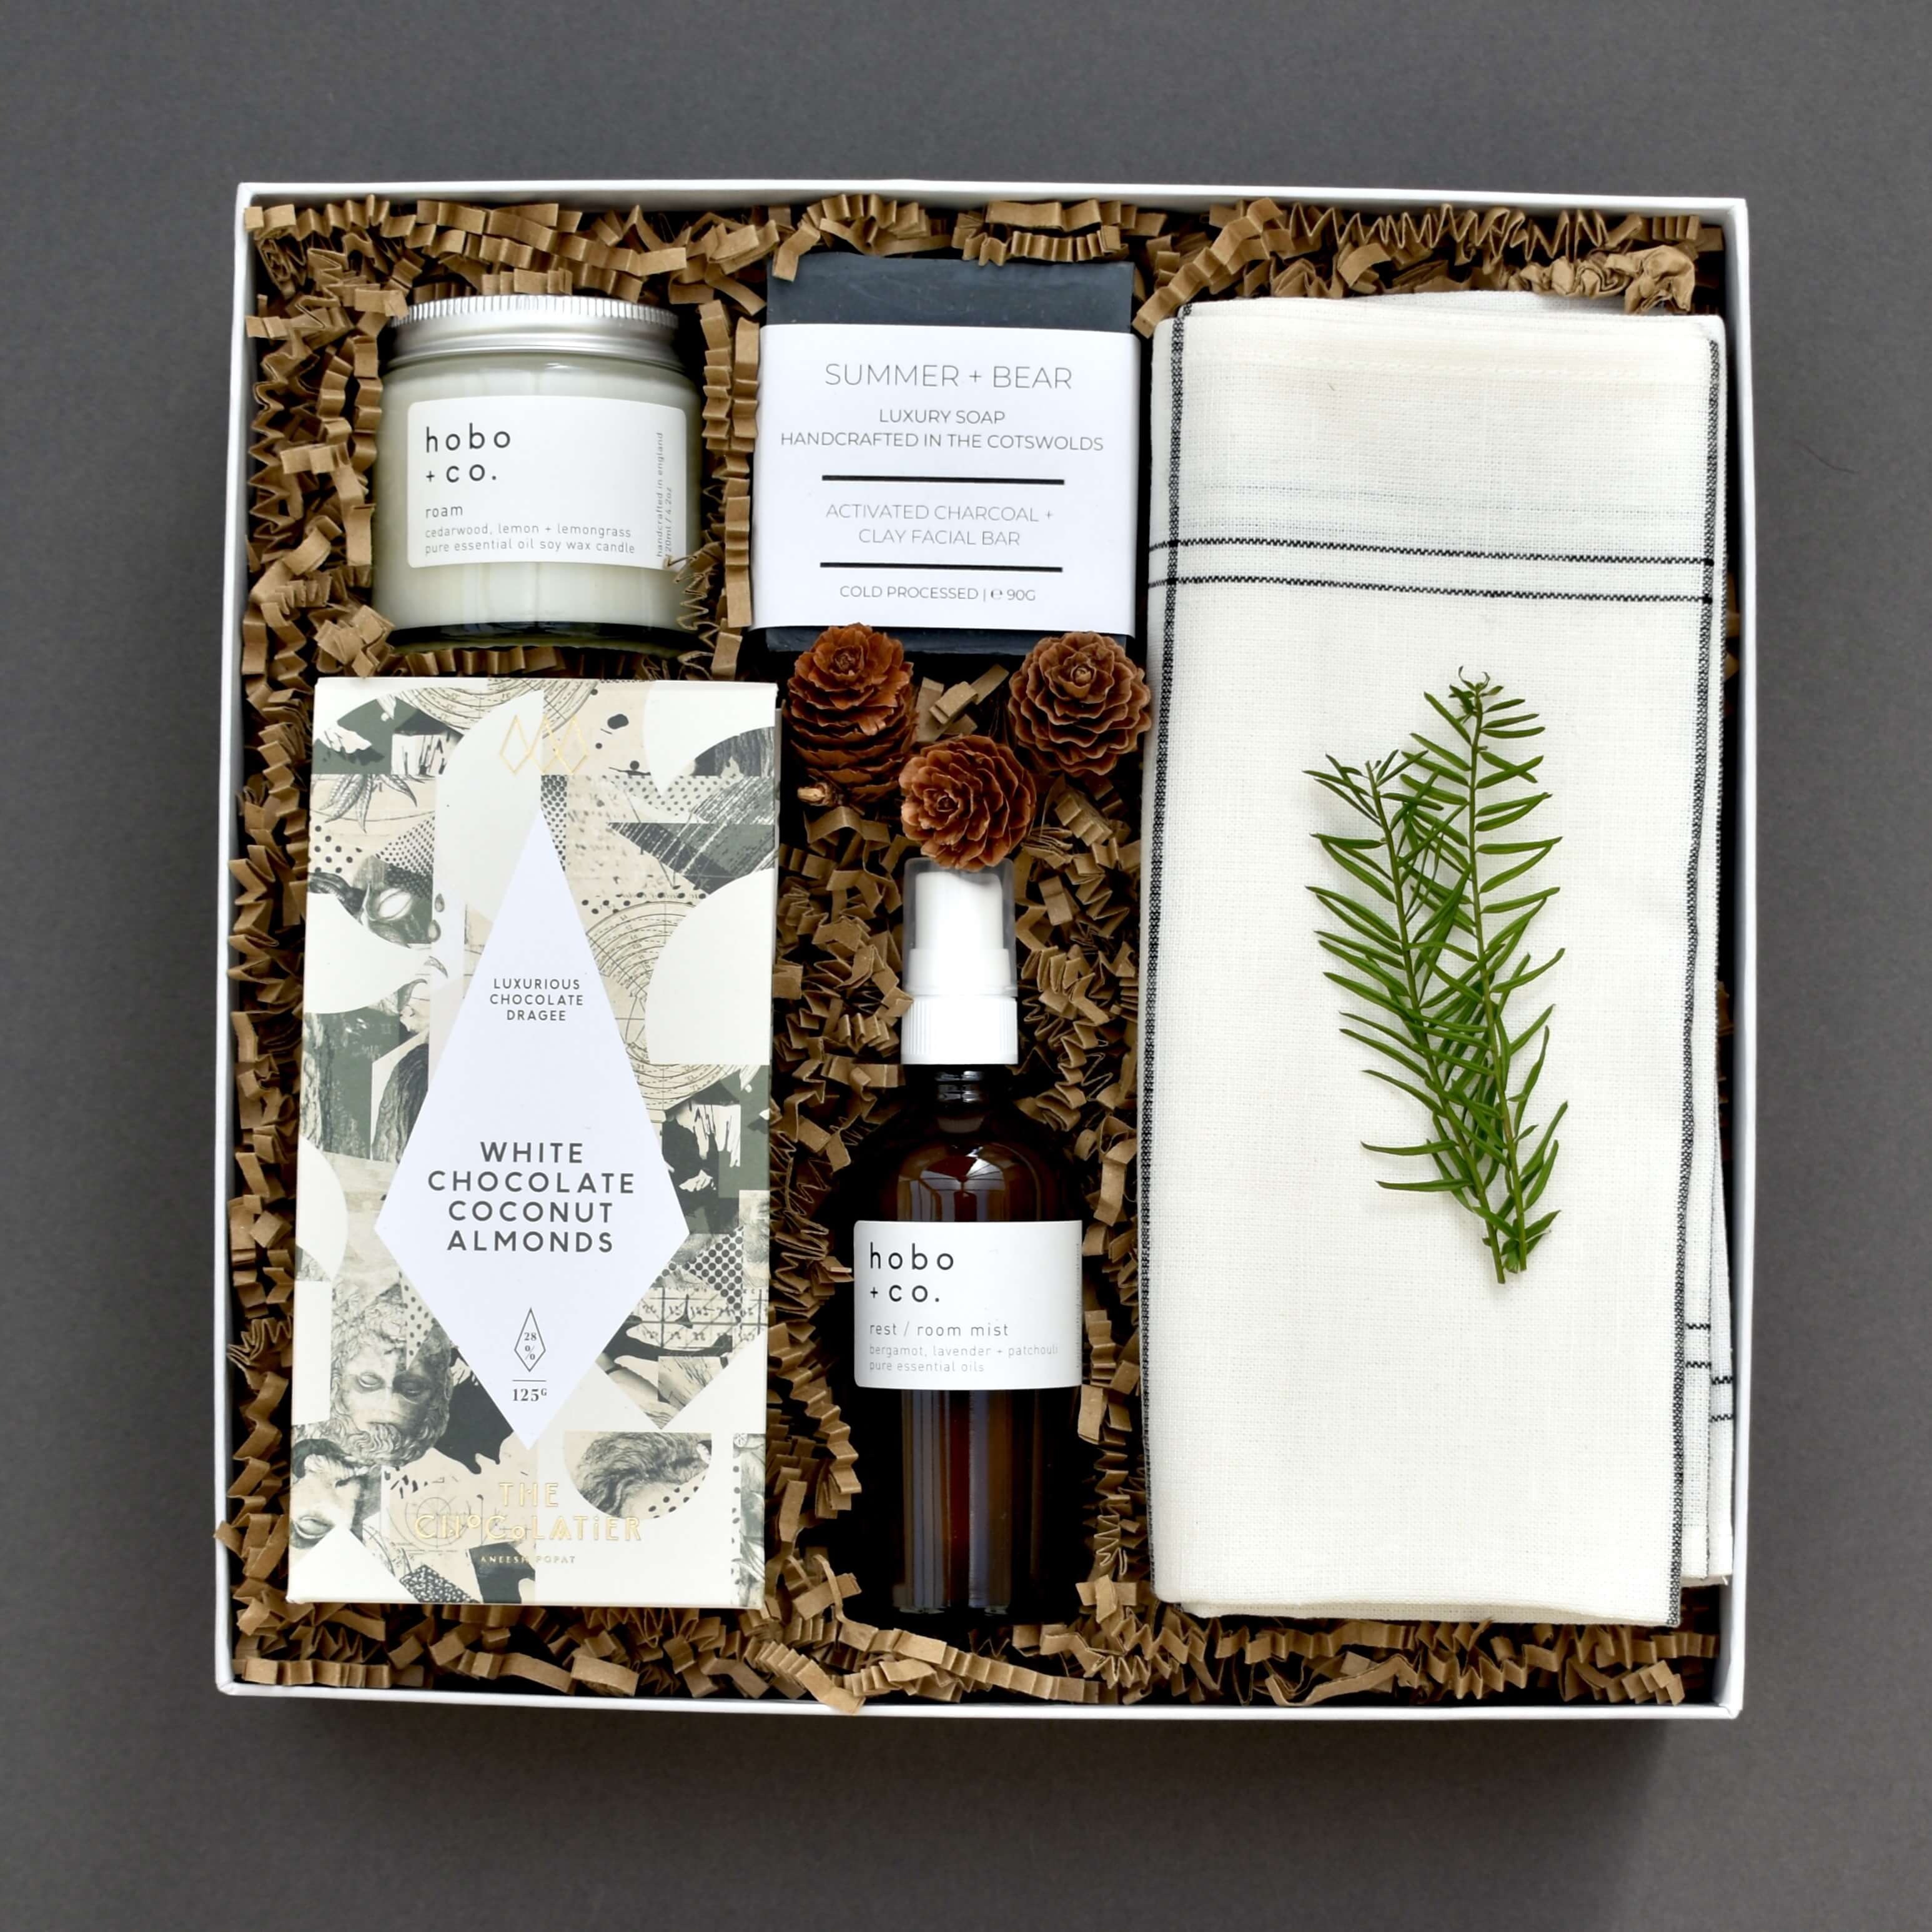 welcome home hostess luxury British gift box. thank you gift, corporate gift, new home gift